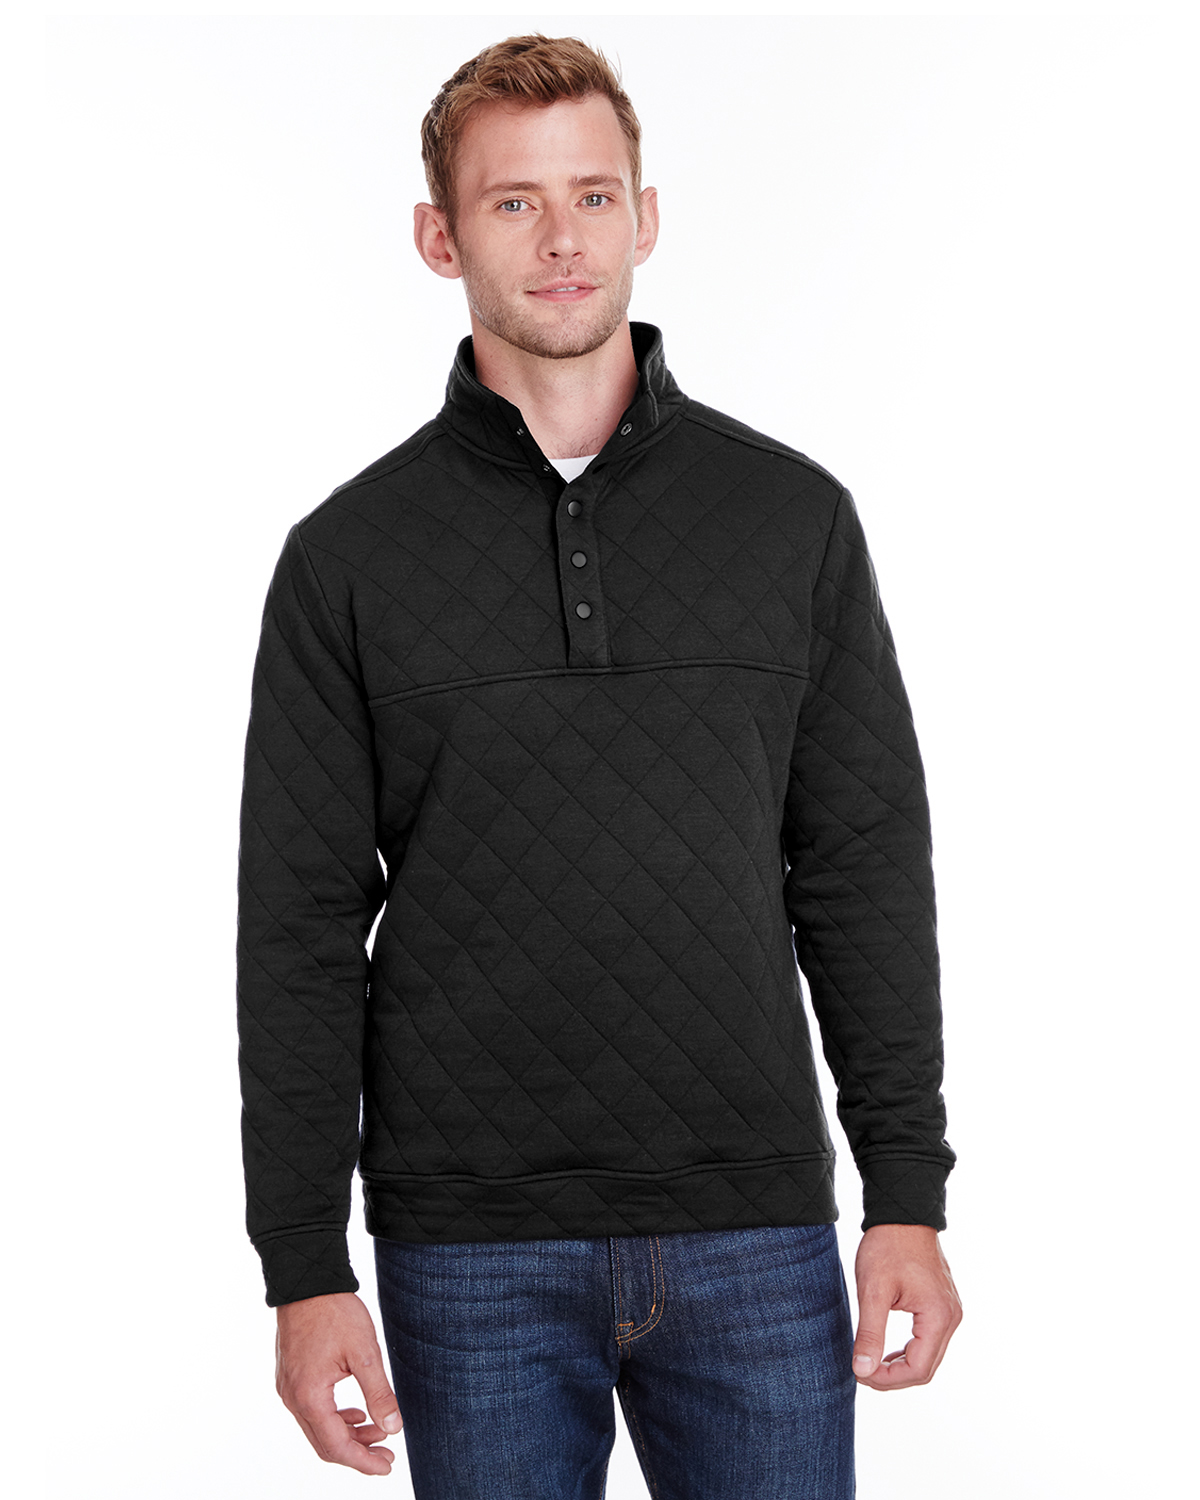 'J America JA8890 Adult Quilted Snap Pullover'